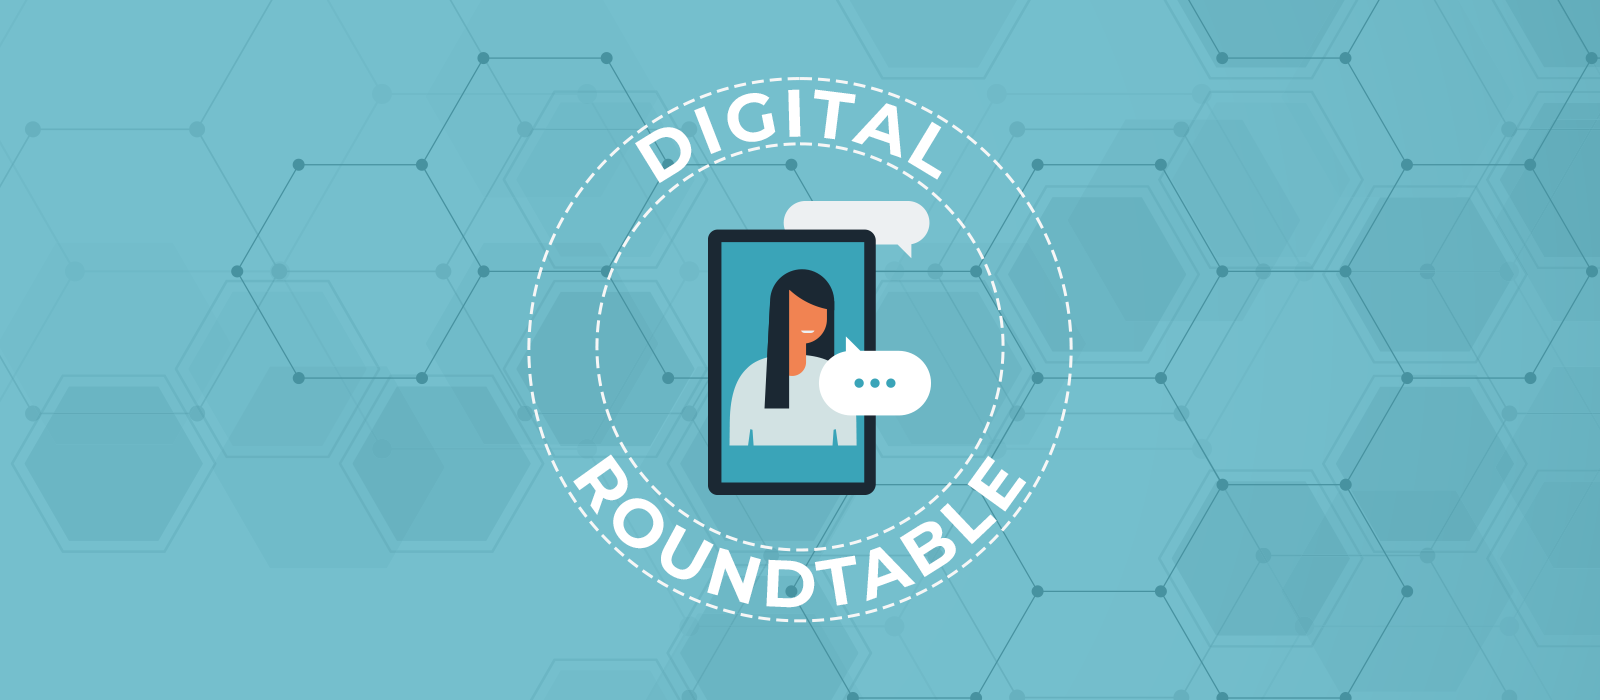 A graphic supporting the digital roundtable blog